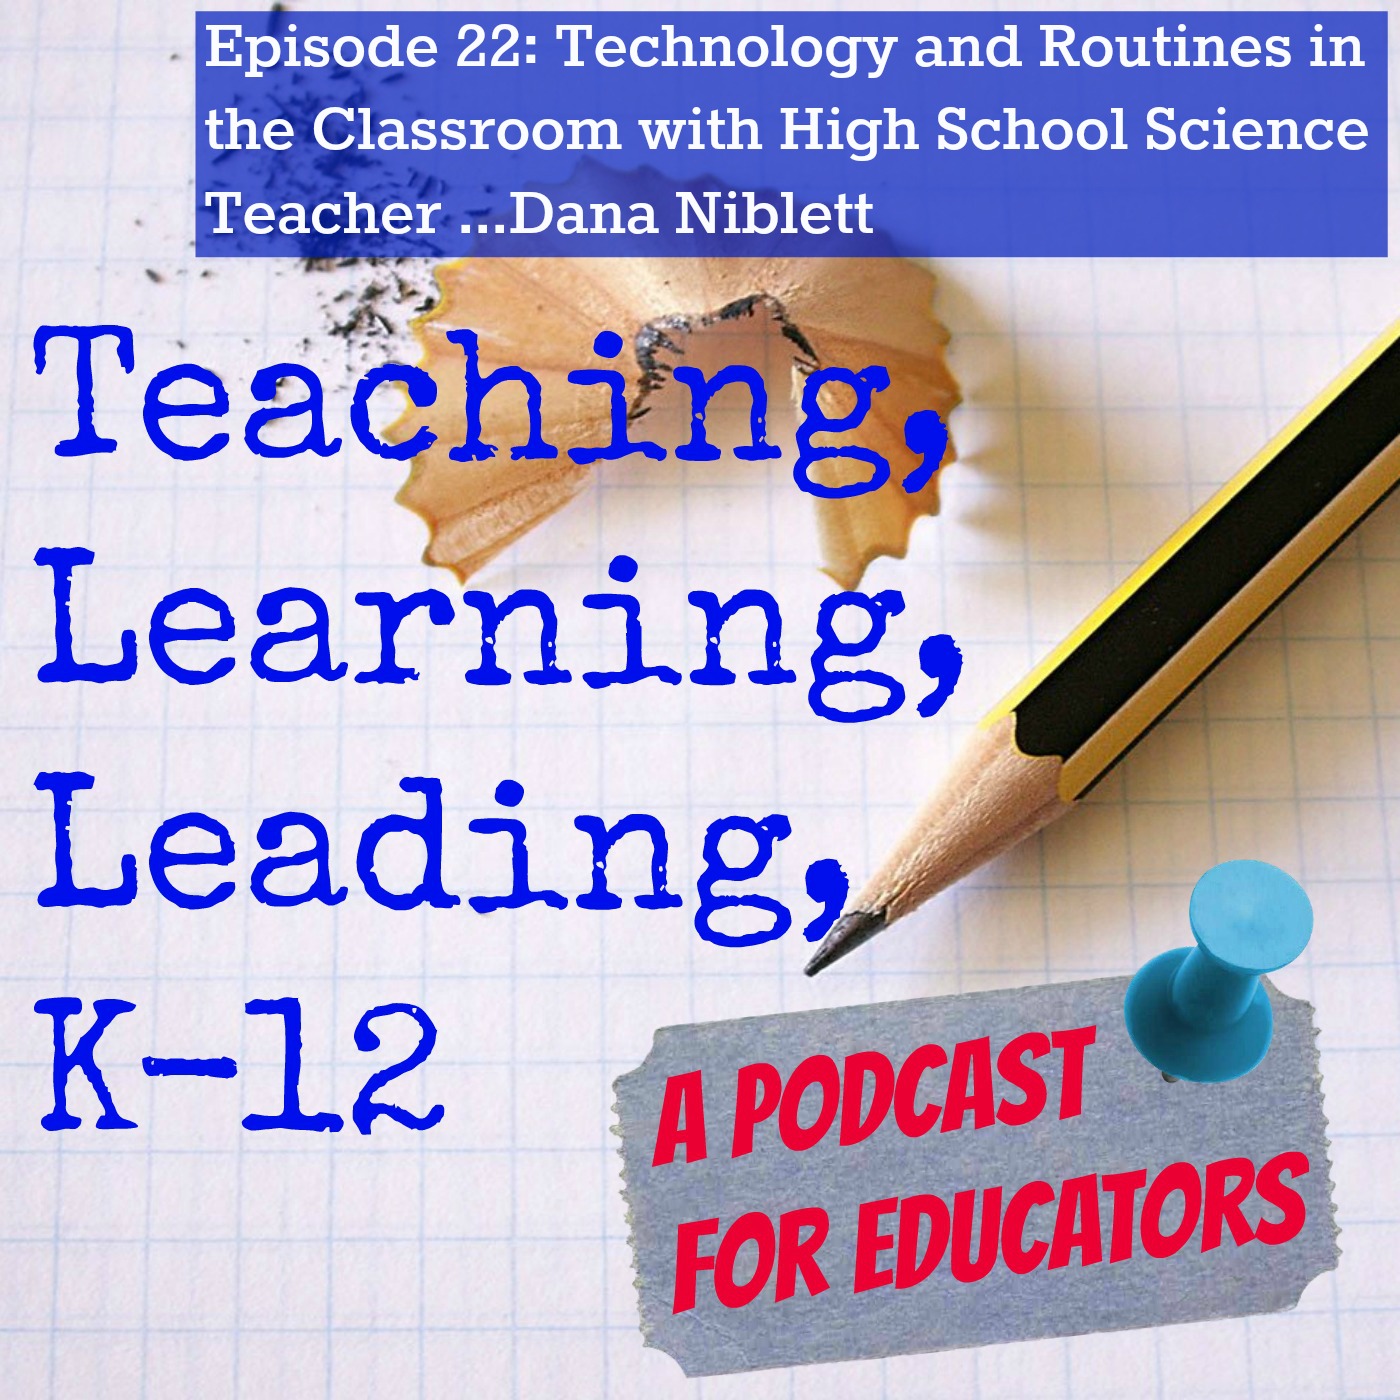 Episode 22: Technology and Classroom Routines with High School Science Teacher...Dana Niblett